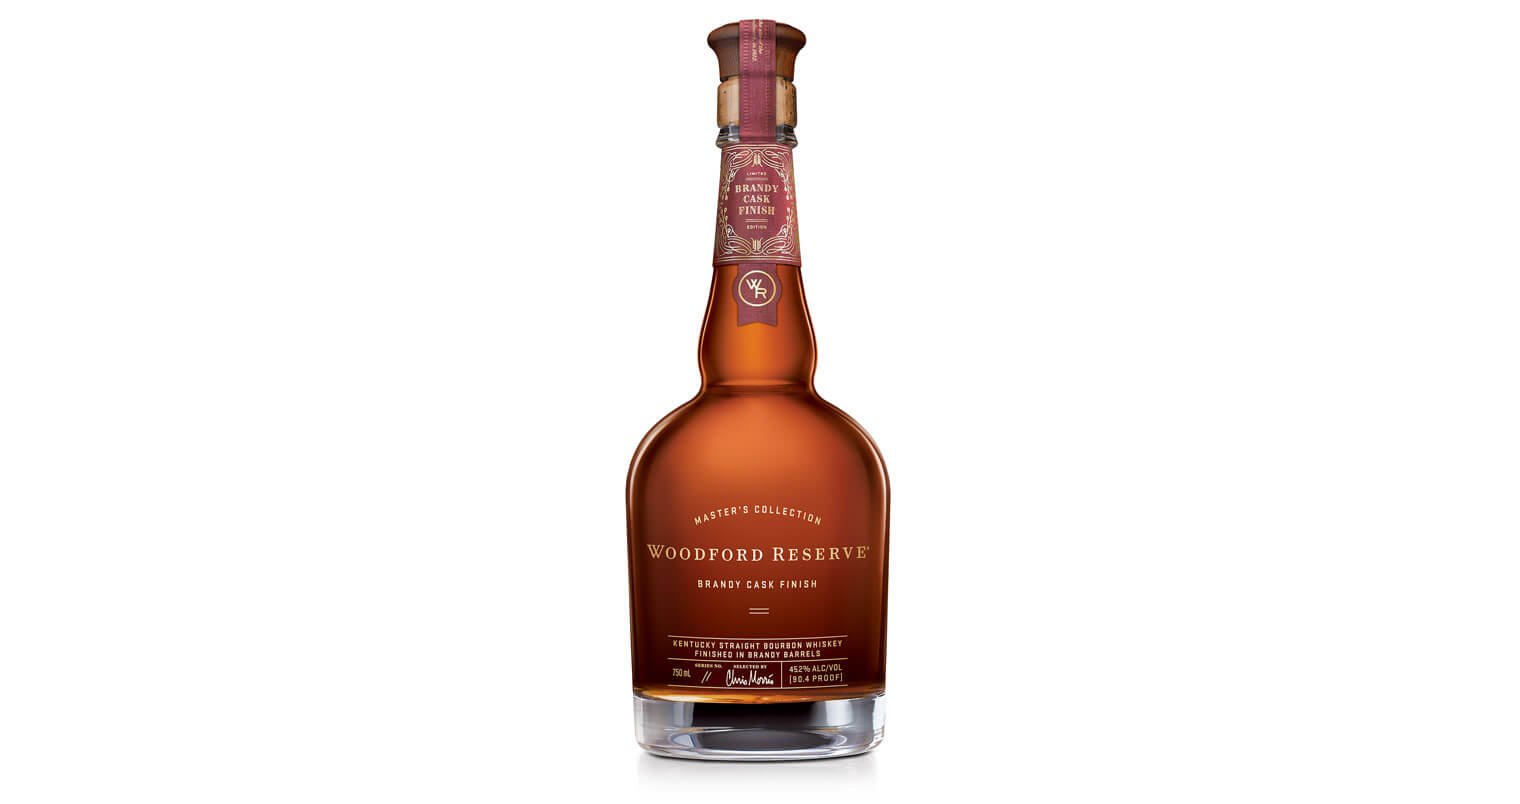 Woodford Reserve Brandy Cask Finish, featured image